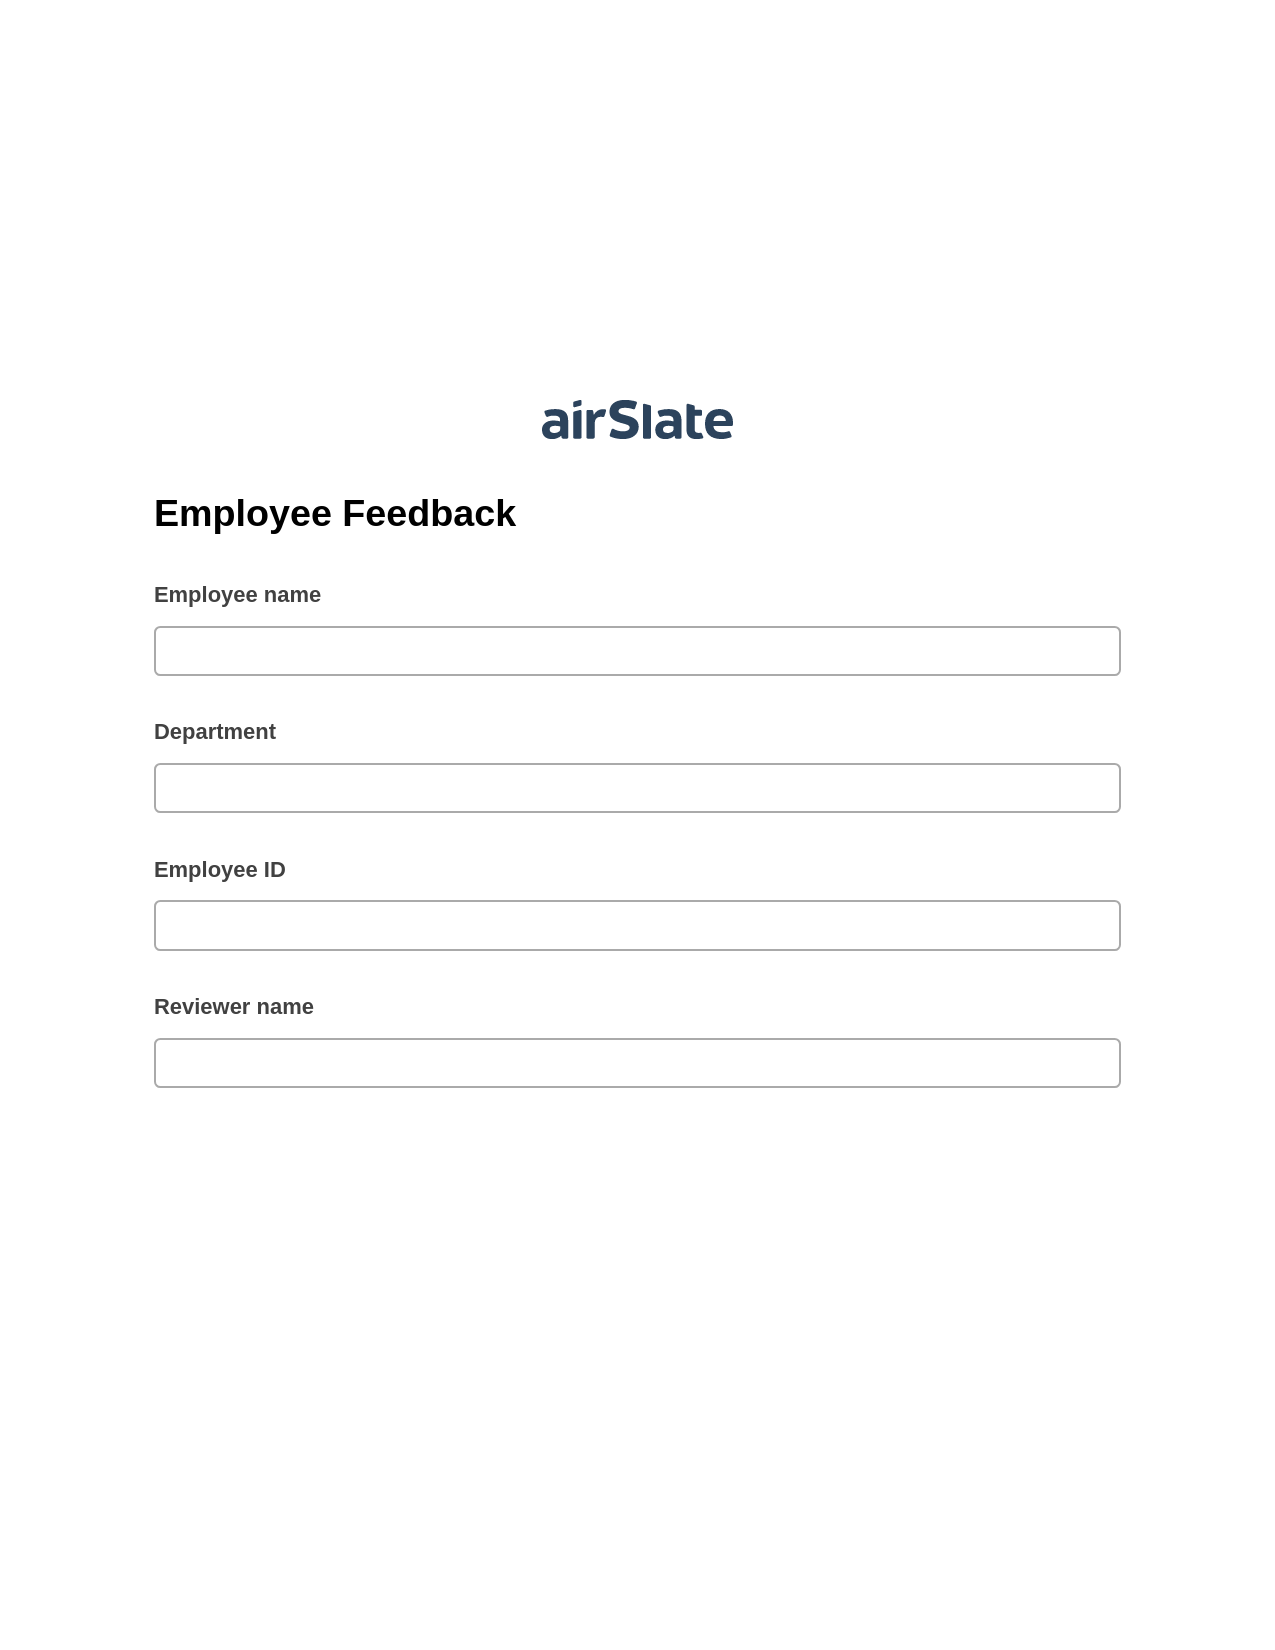 Employee Feedback Pre-fill from CSV File Bot, Pre-fill with Custom Data Bot, Export to Salesforce Bot